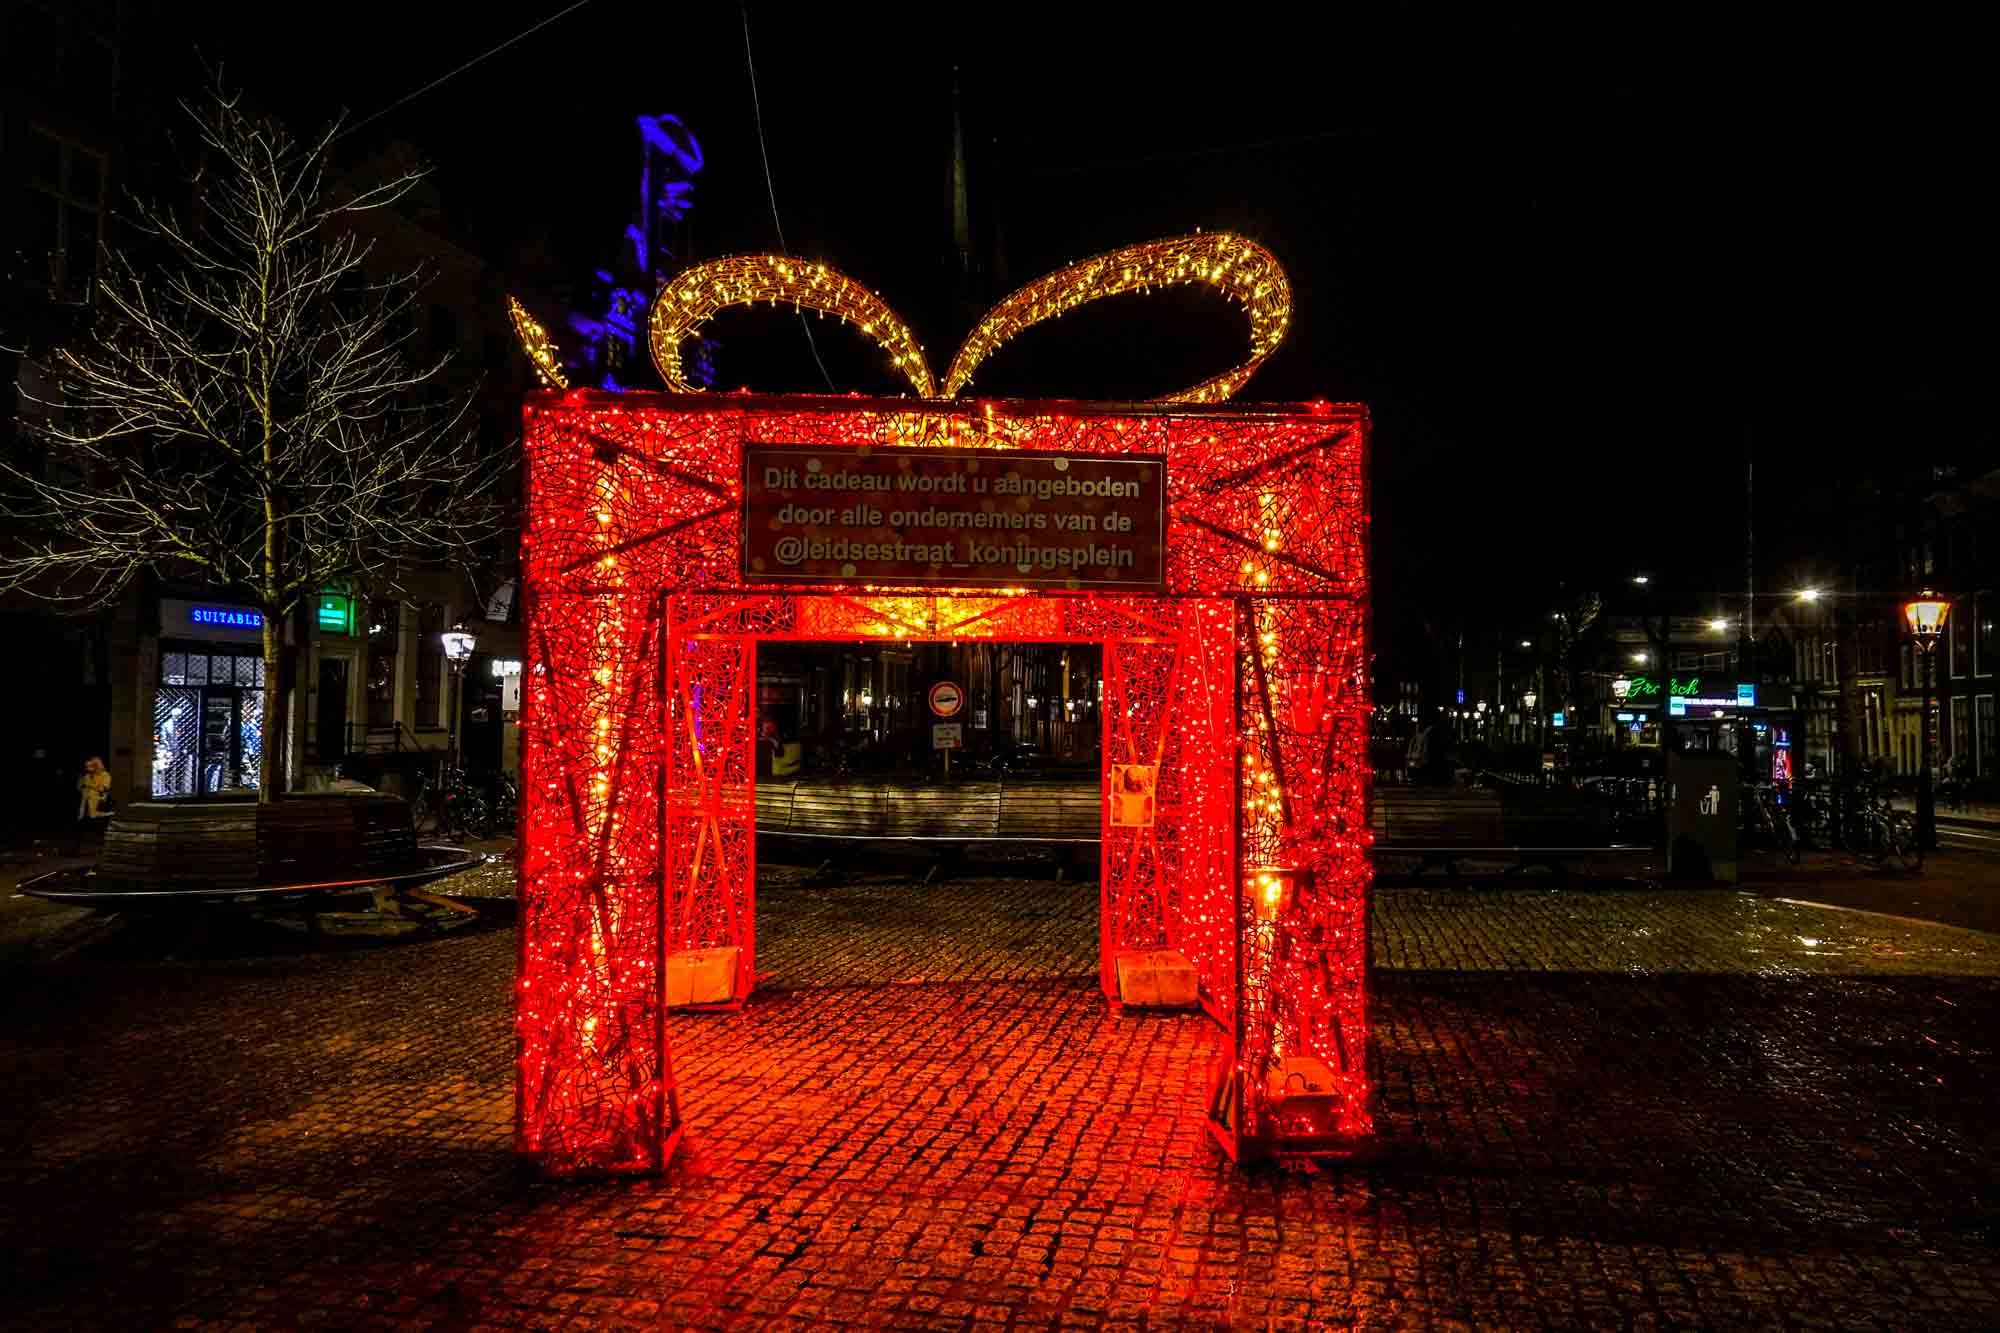 Giant red Christmas present sculpture made of Christmas lights